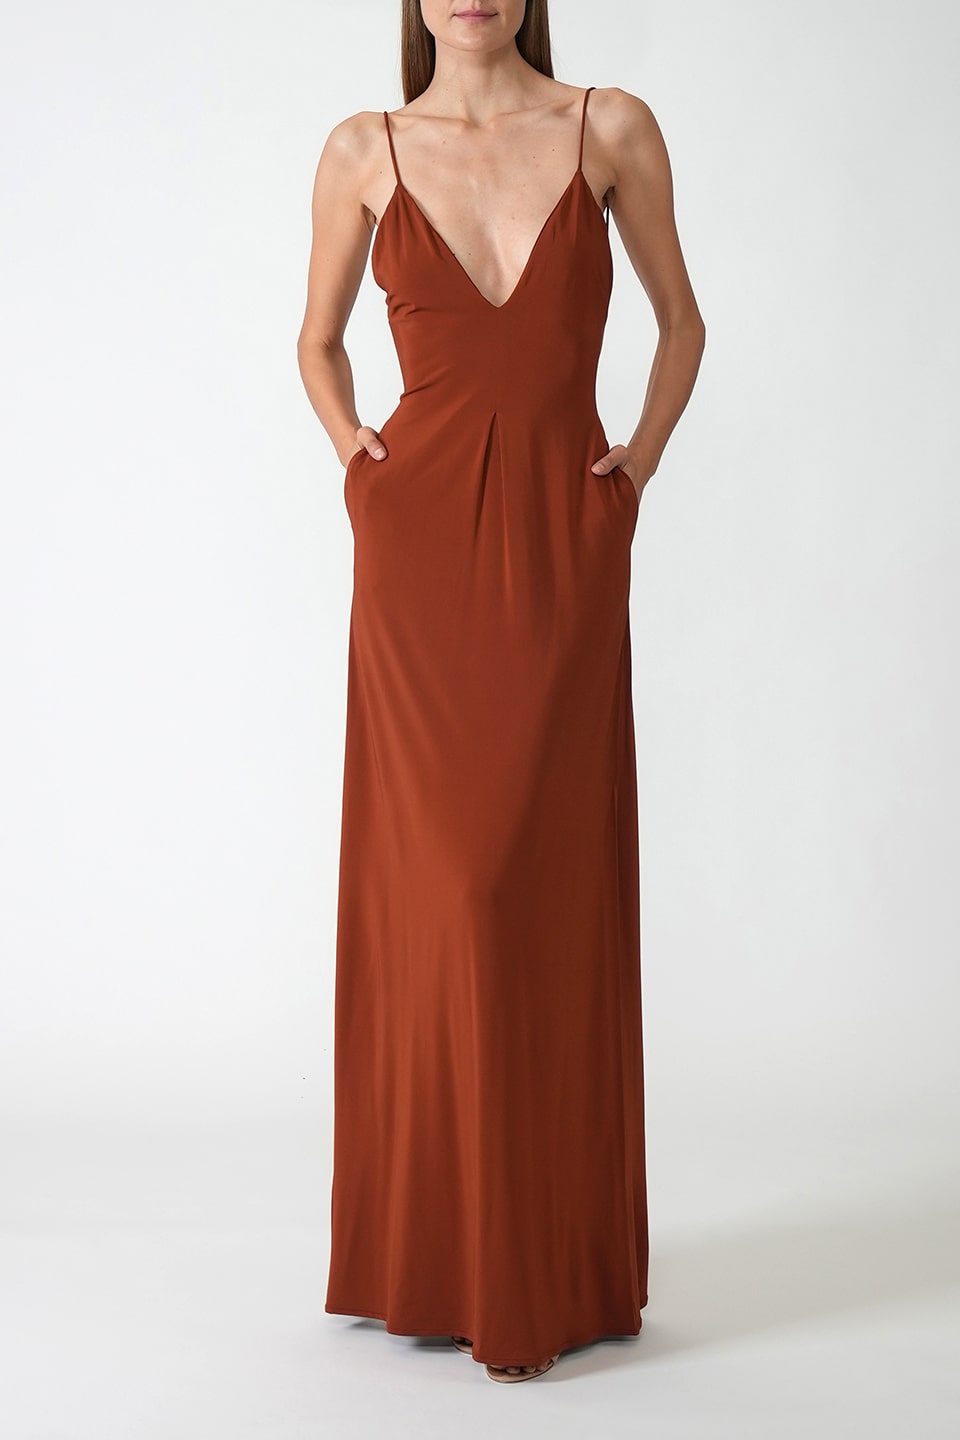 Thumbnail for Product gallery 1, Backless Long Dress Bronze